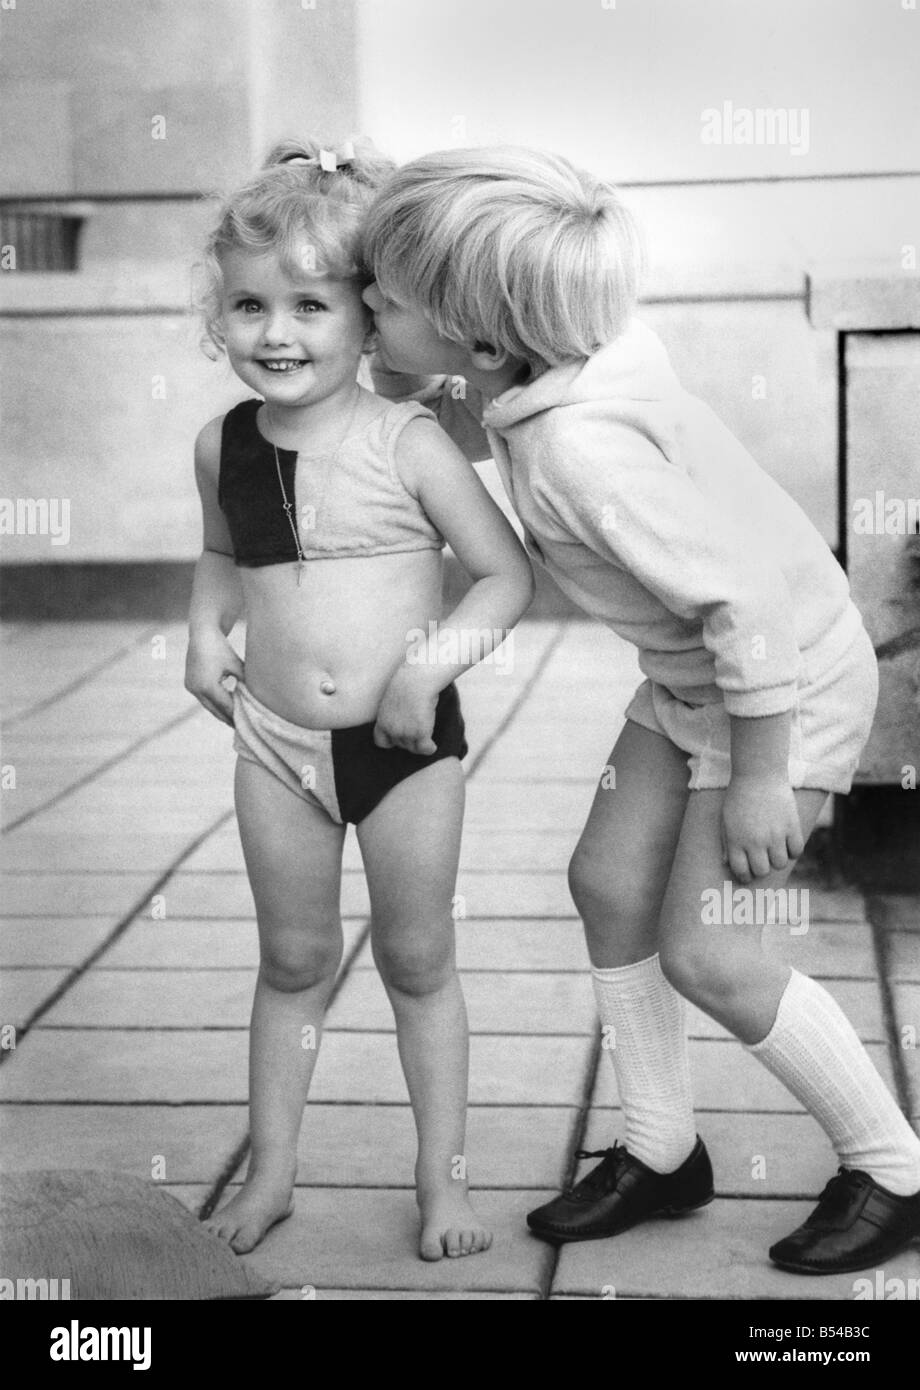 Fashion 1960's: Little Raymond, Finding these fashion models so irresistible. You just can't get away from it. Fashion models seem to be getting younger every day. And more beautiful too. Three-year-old Samantha Gates quite stole the show in her bikini Tuesday (22-10-68) at a London display of children's clothes. She may need a few lessons in deportment. of course. After all, ladies shouldn't be seen pulling up their pants in public. But four-year-old male model Raymond Paul Mears finds her quite irresistible Stock Photo